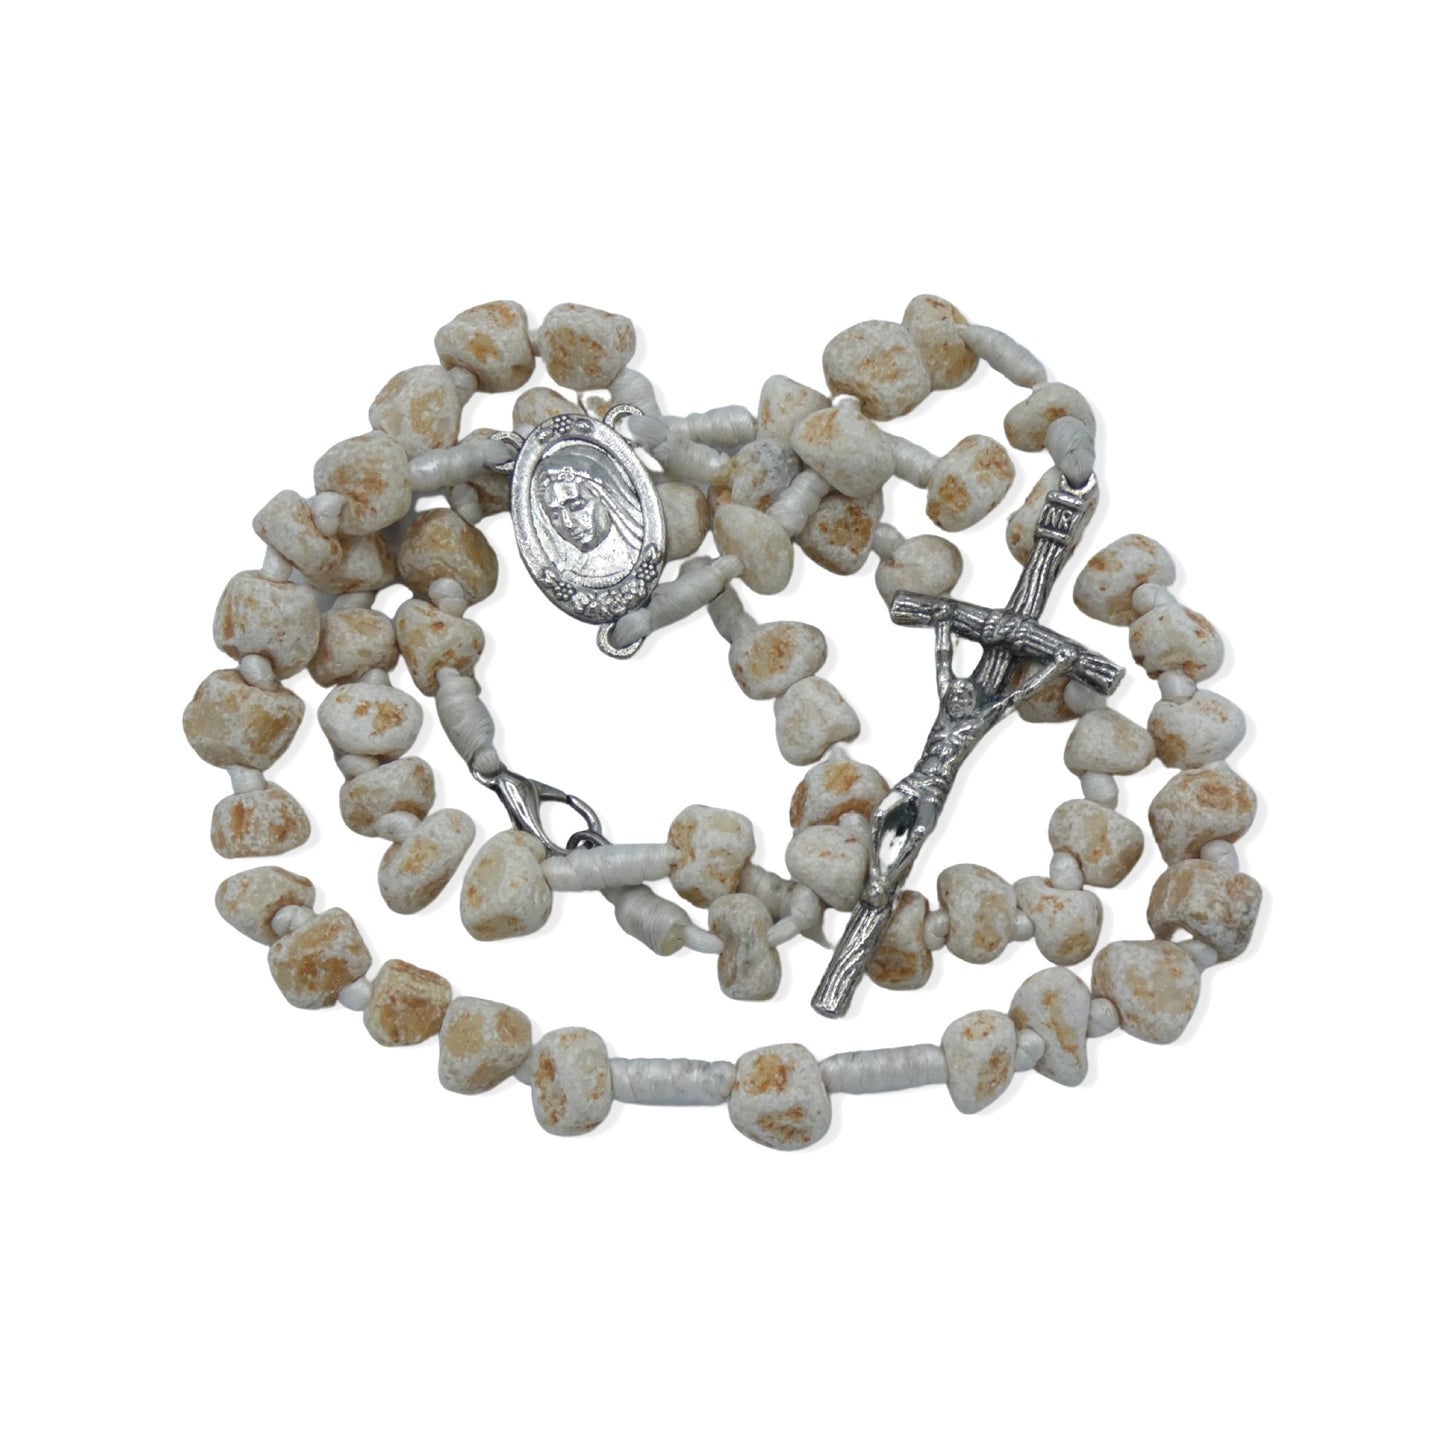 Queen of Peace Stone Rosary with JPII Crucifix